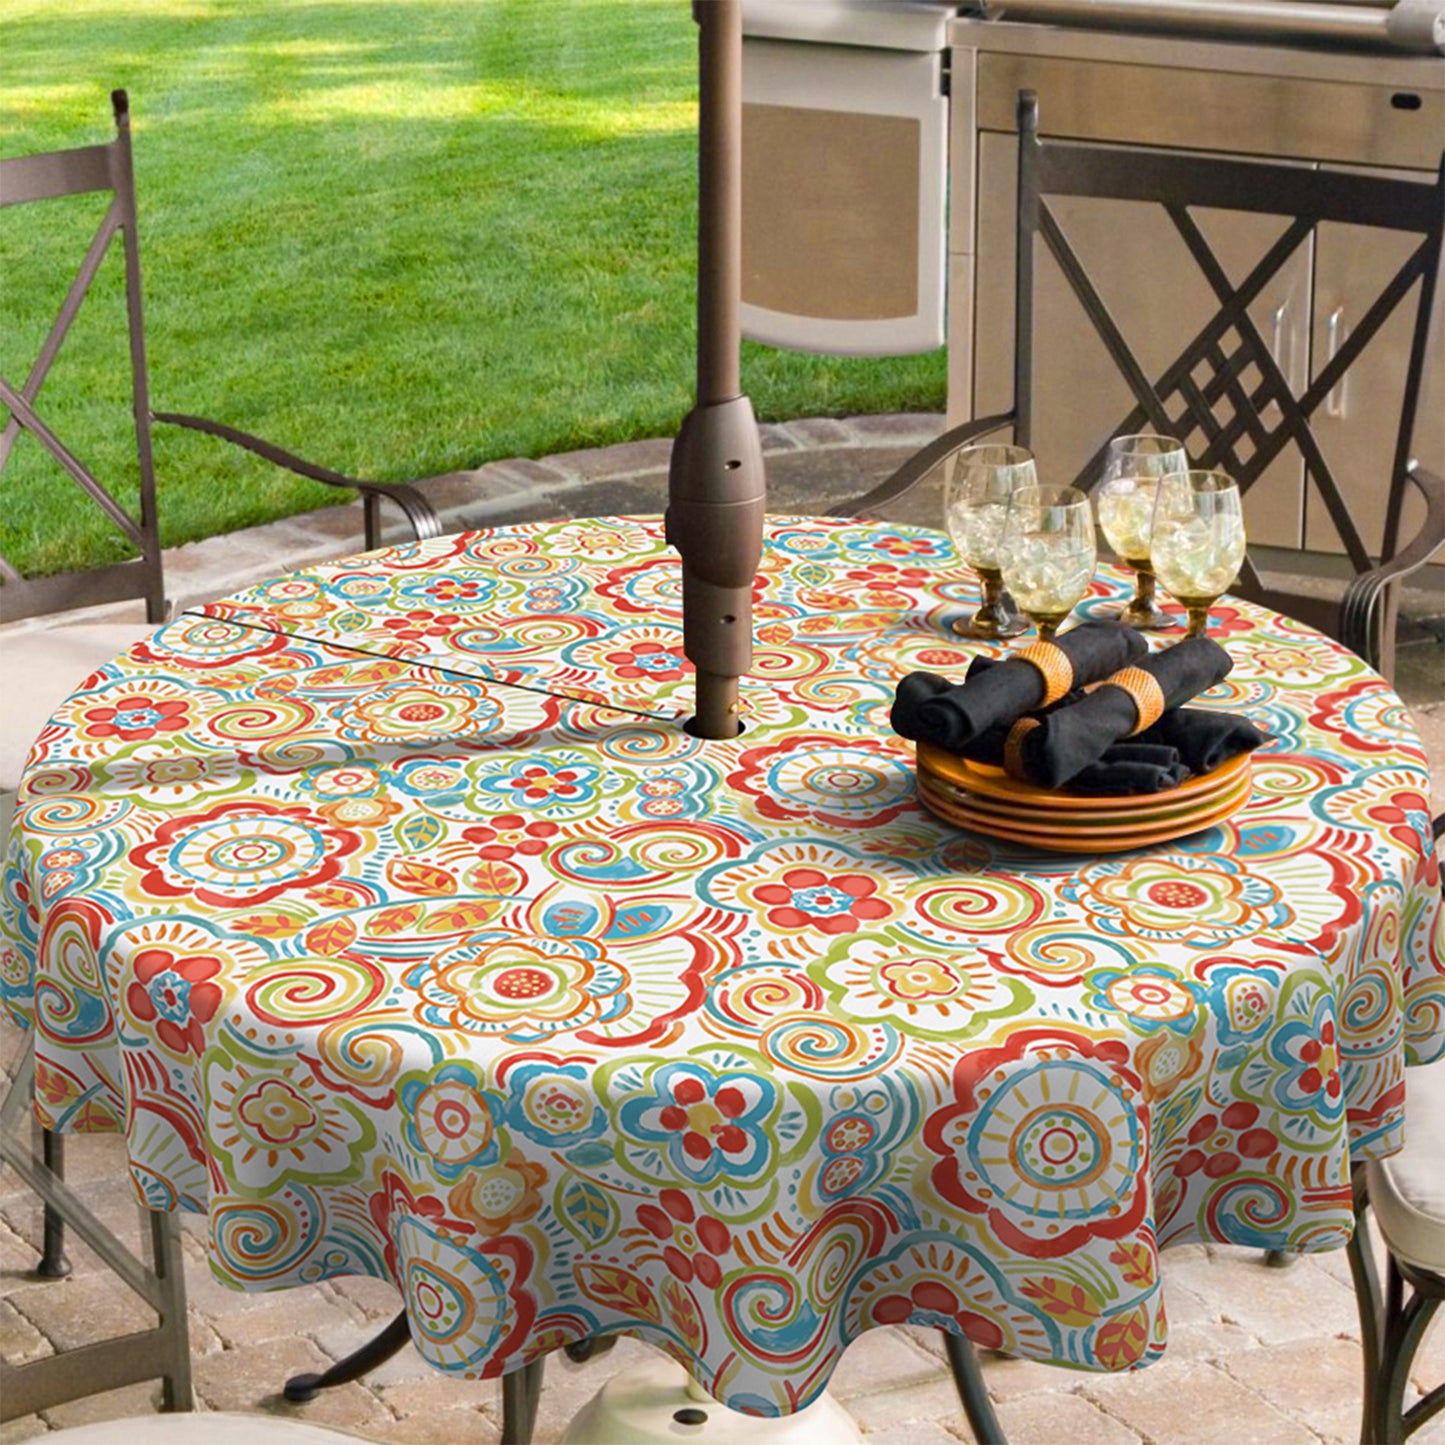 Melody Elephant Outdoor/Indoor Round Tablecloth with Umbrella Hole Zipper, Decorative Circular Table Cover for Home Garden, 60 Inch, Flower Multi